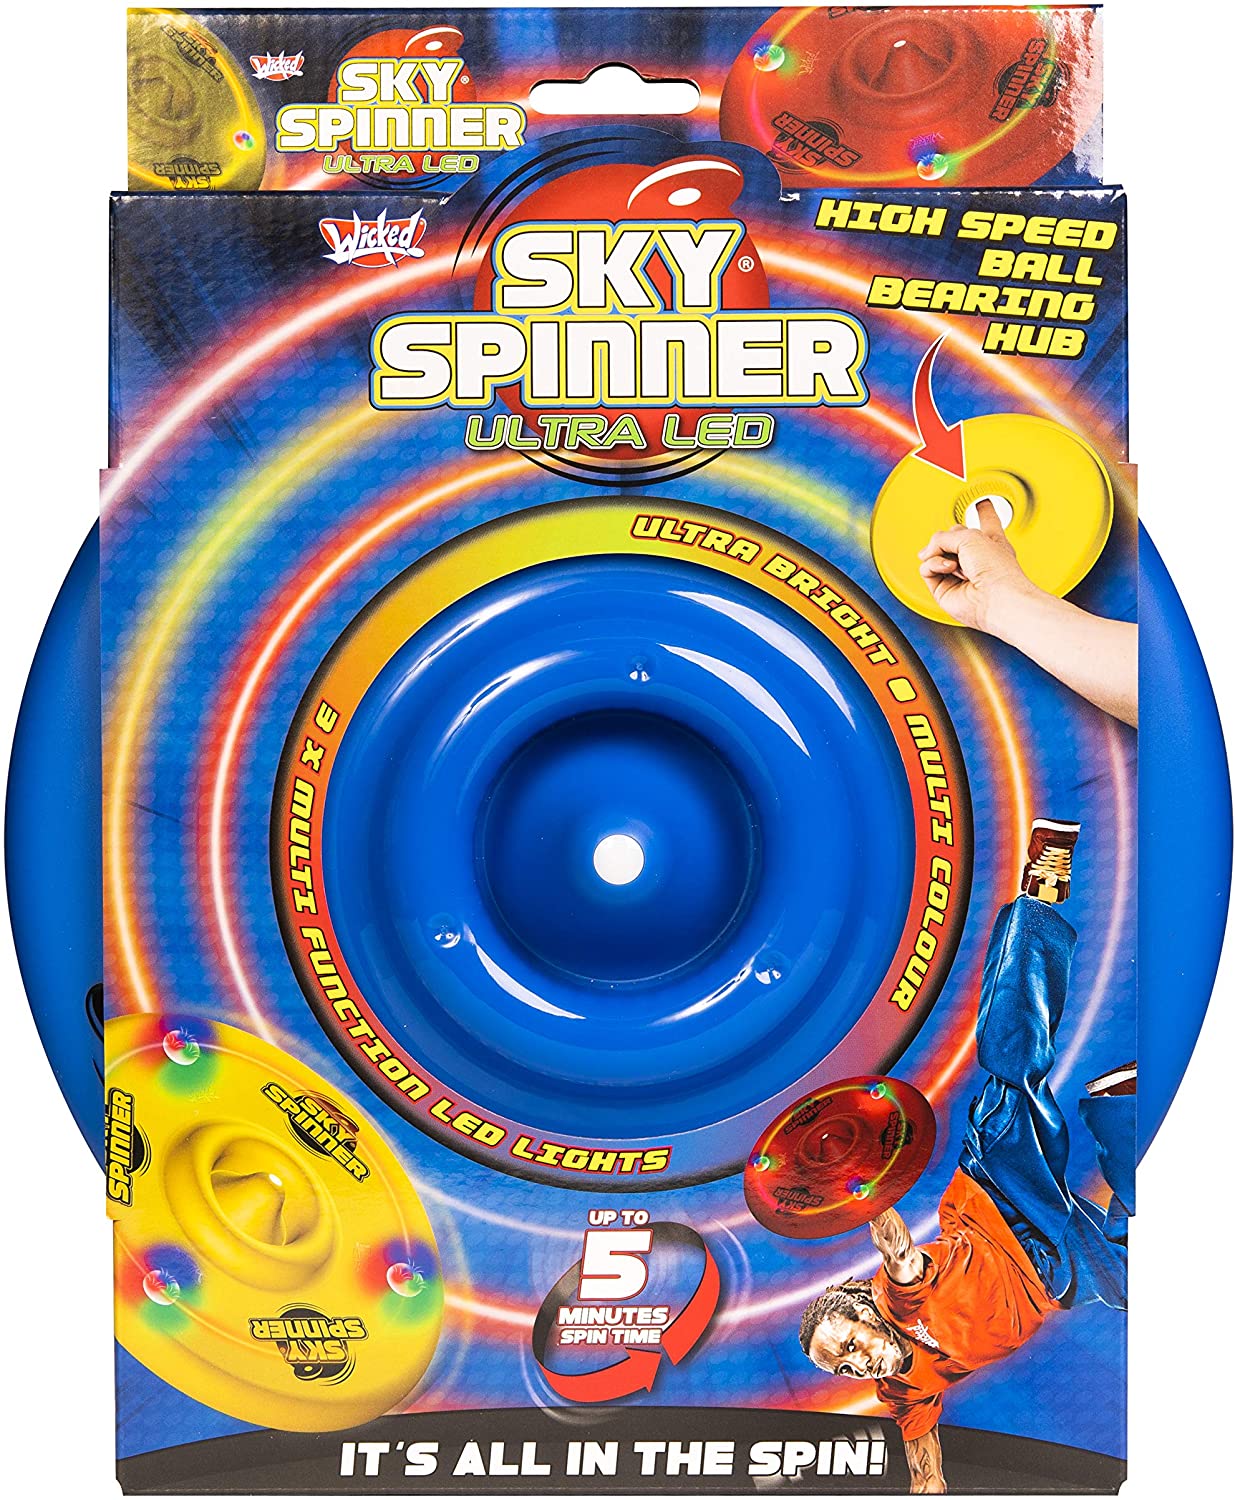 Sky Spinner Frisbee Orignl Trick Disc spins over 500 RPM colors Red/Yellow/Blue 